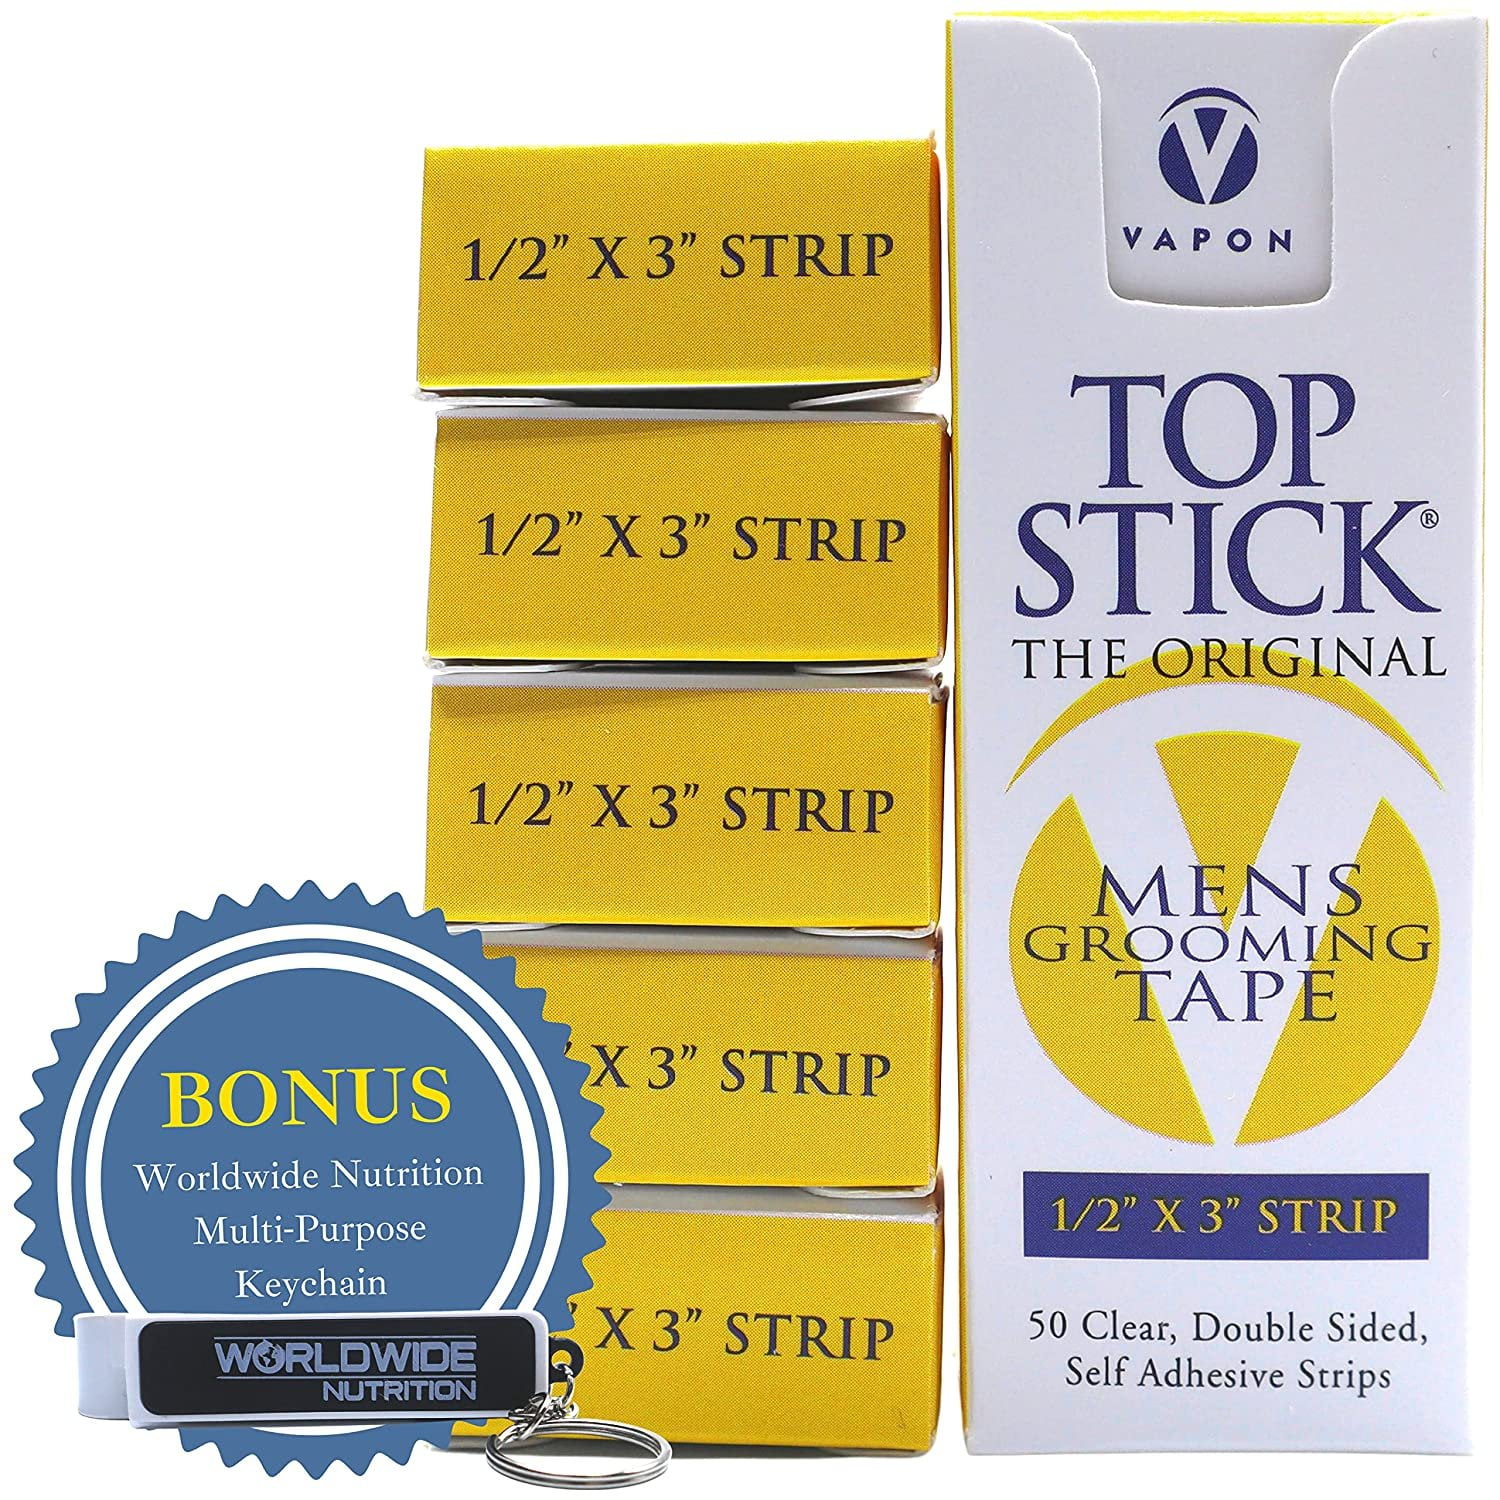 Topstick Men's Clear Double Sided Grooming Tape Bundle - (1 Box of 50  Strips) 1 x 3 & (1 Box of 50 Strips) 1/2 x 3